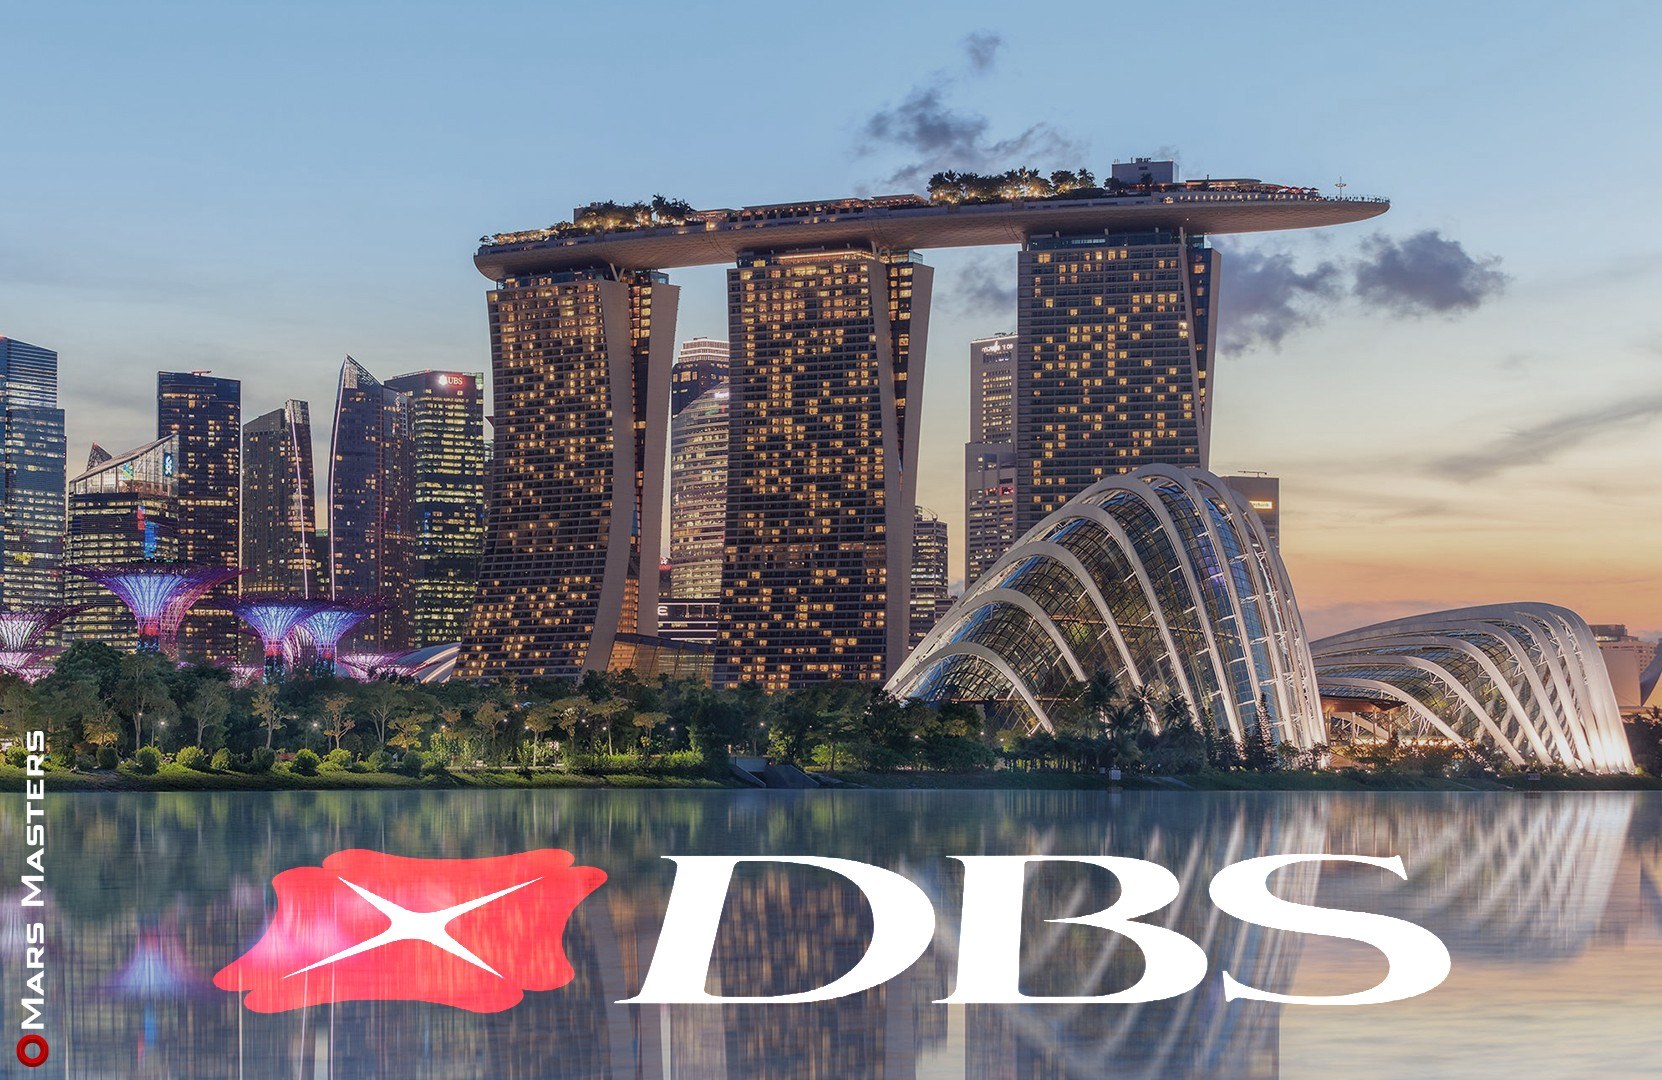 Singapore’s biggest bank DBS will set up crypto exchange ...